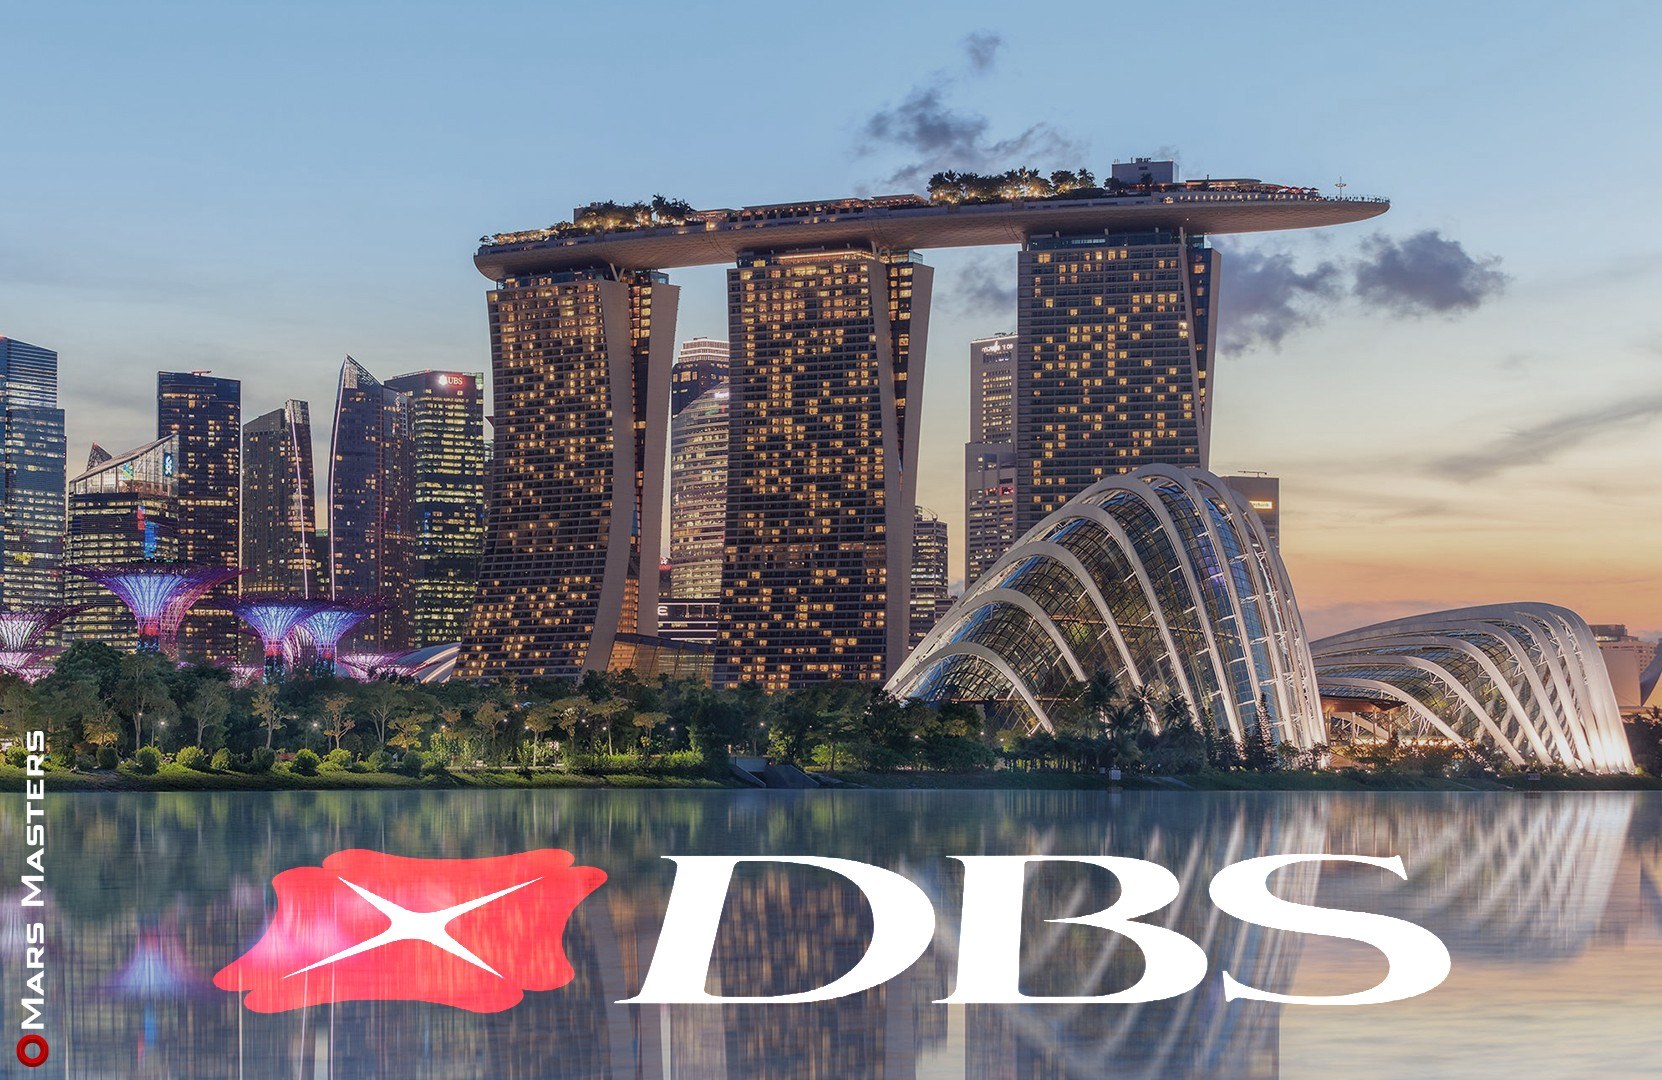 Singapore’s biggest bank DBS will set up crypto exchange ...